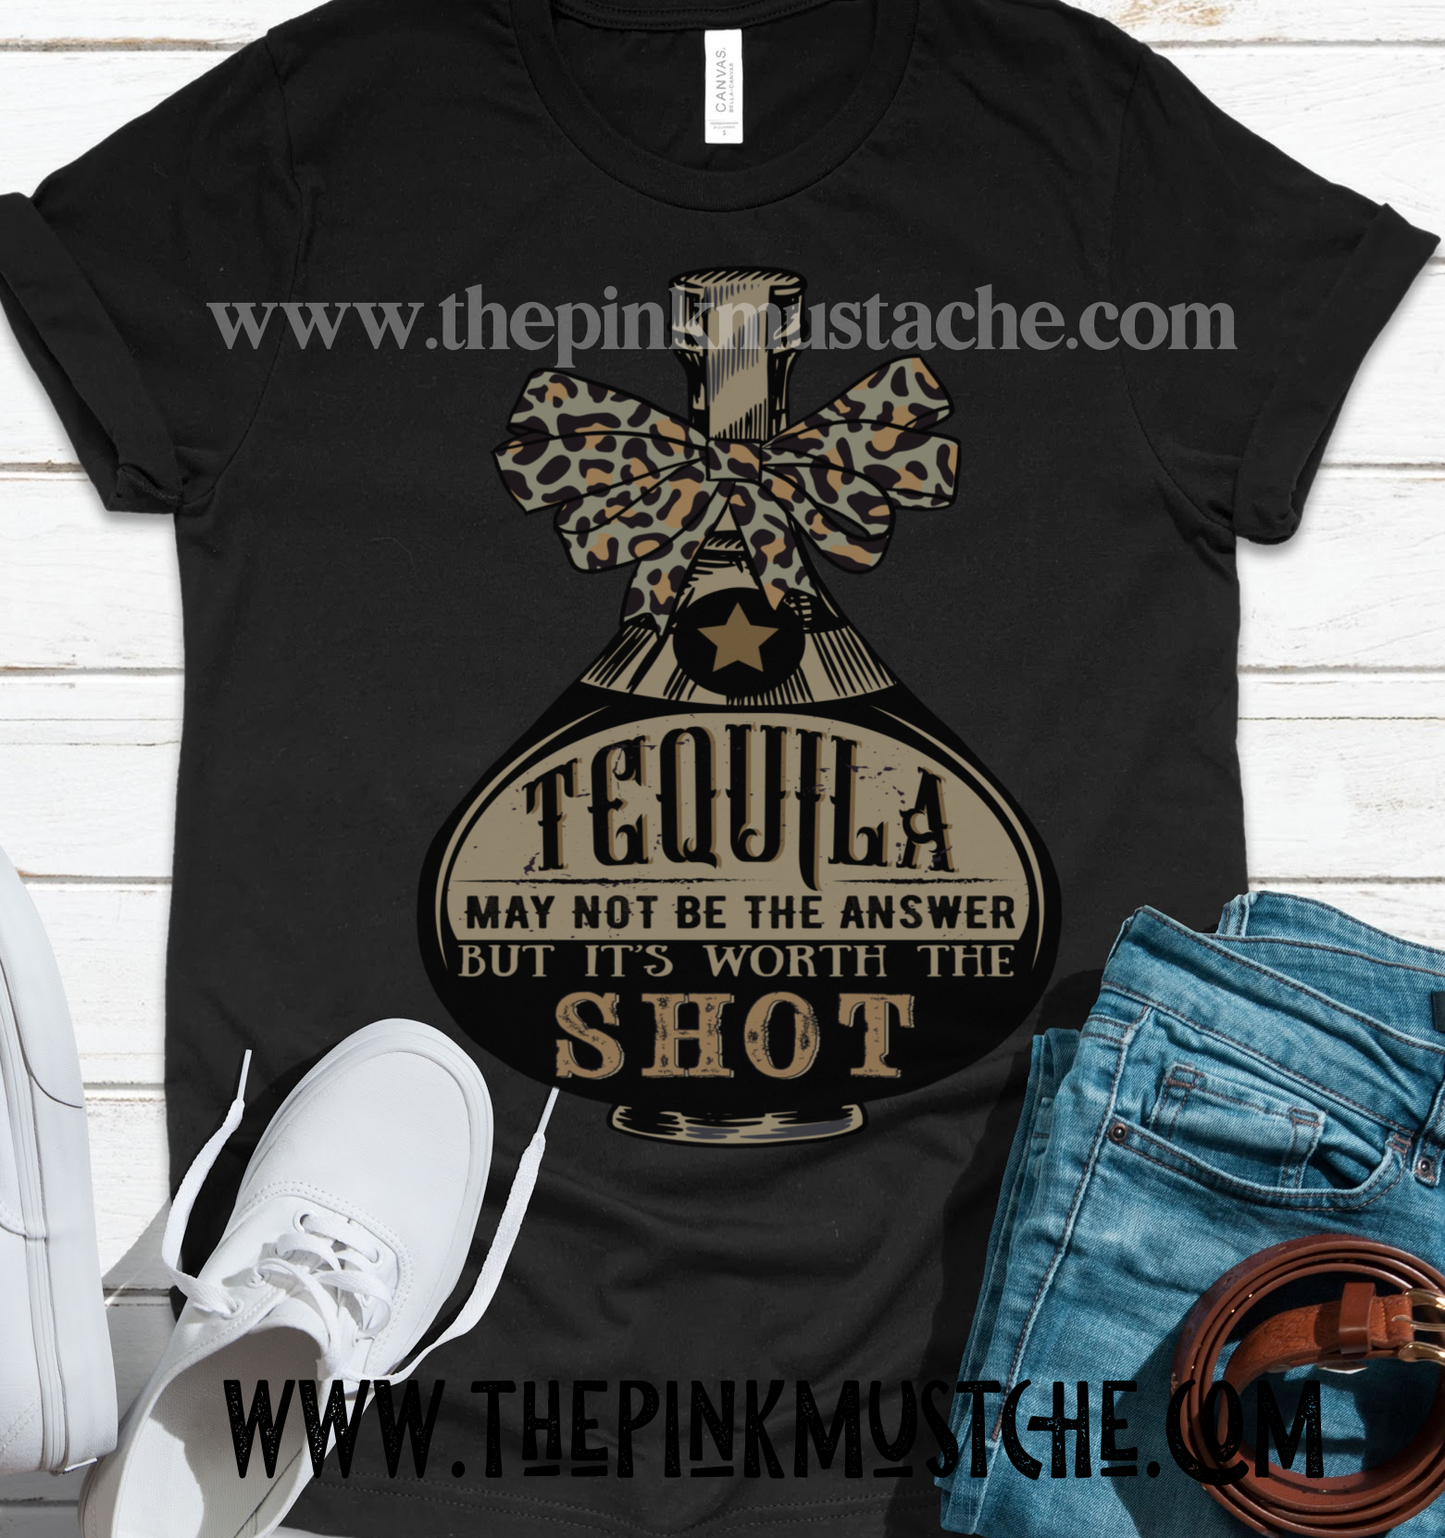 Tequila May Not Be The Answer But It's Worth A Shot - Tee / Bella Canvas T-Shirt/ Funny Graphic Tee/ Salty - Tequila- St. Patricks Day/ Cinco De Mayo